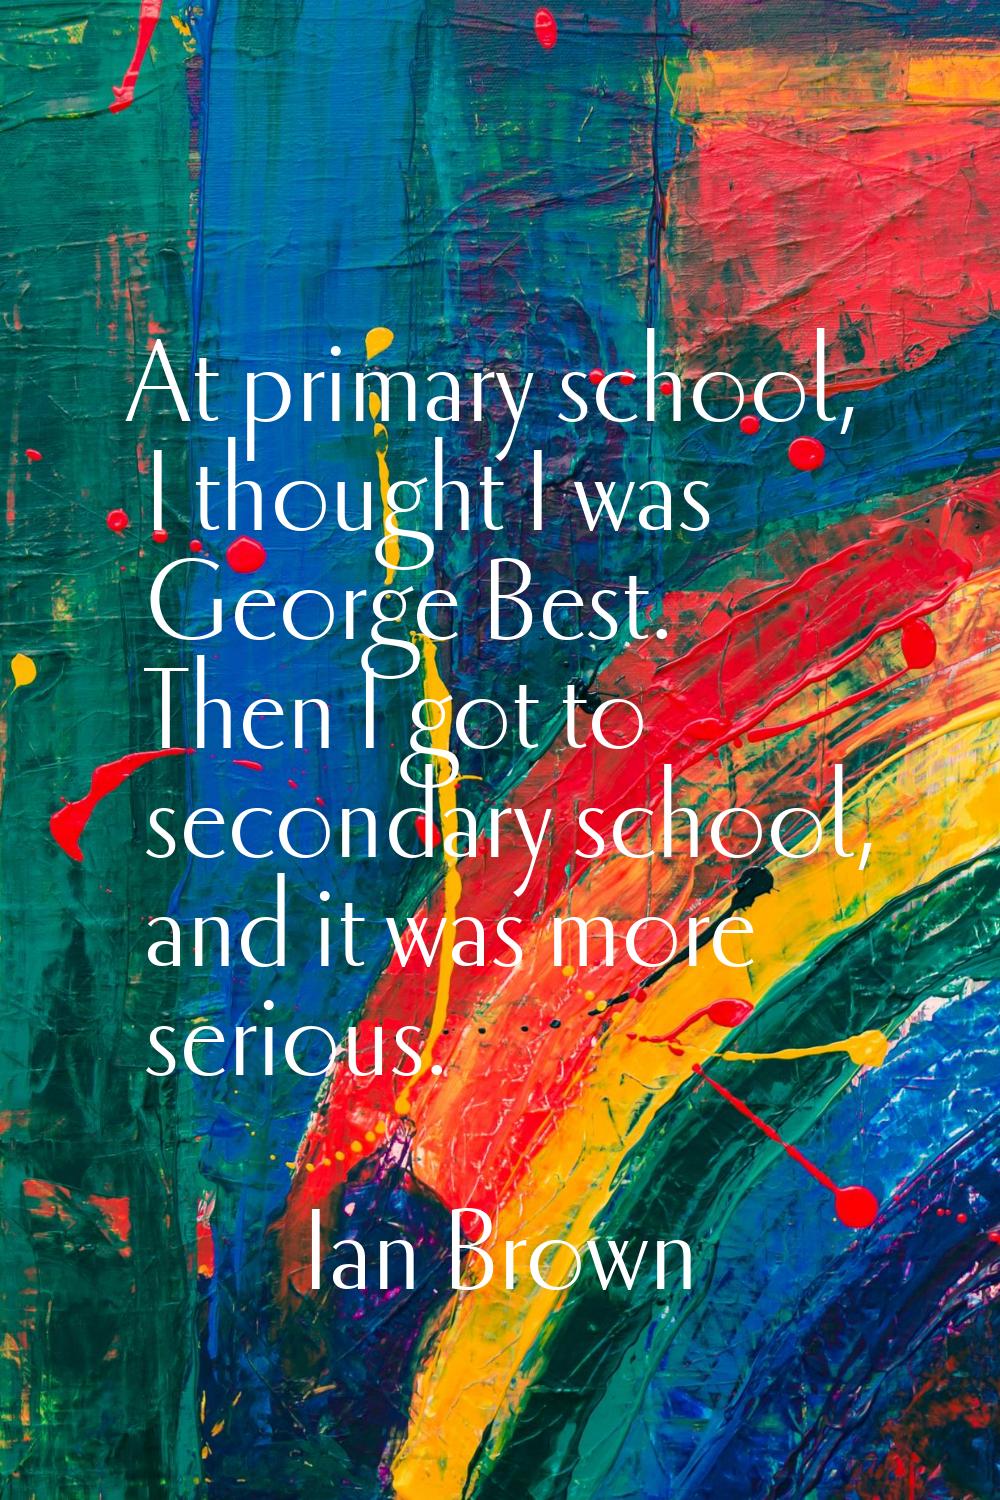 At primary school, I thought I was George Best. Then I got to secondary school, and it was more ser